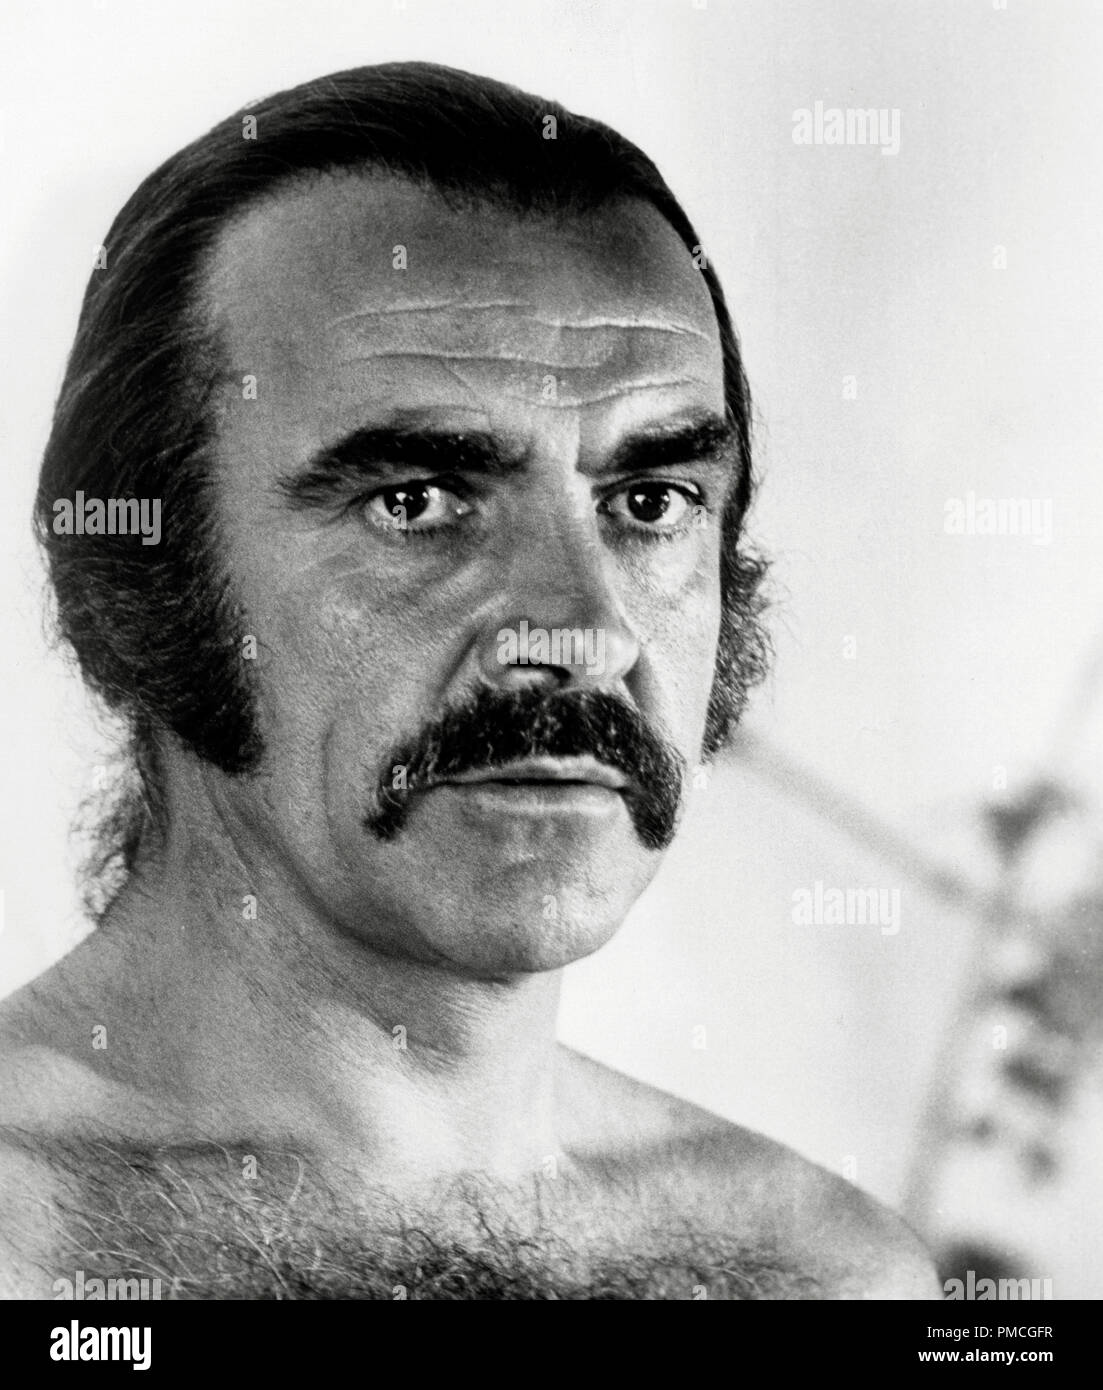 Sean Connery, 'Zardoz' (1974) 20th Century Fox  File Reference # 33536 853THA  For Editorial Use Only -  All Rights Reserved Stock Photo